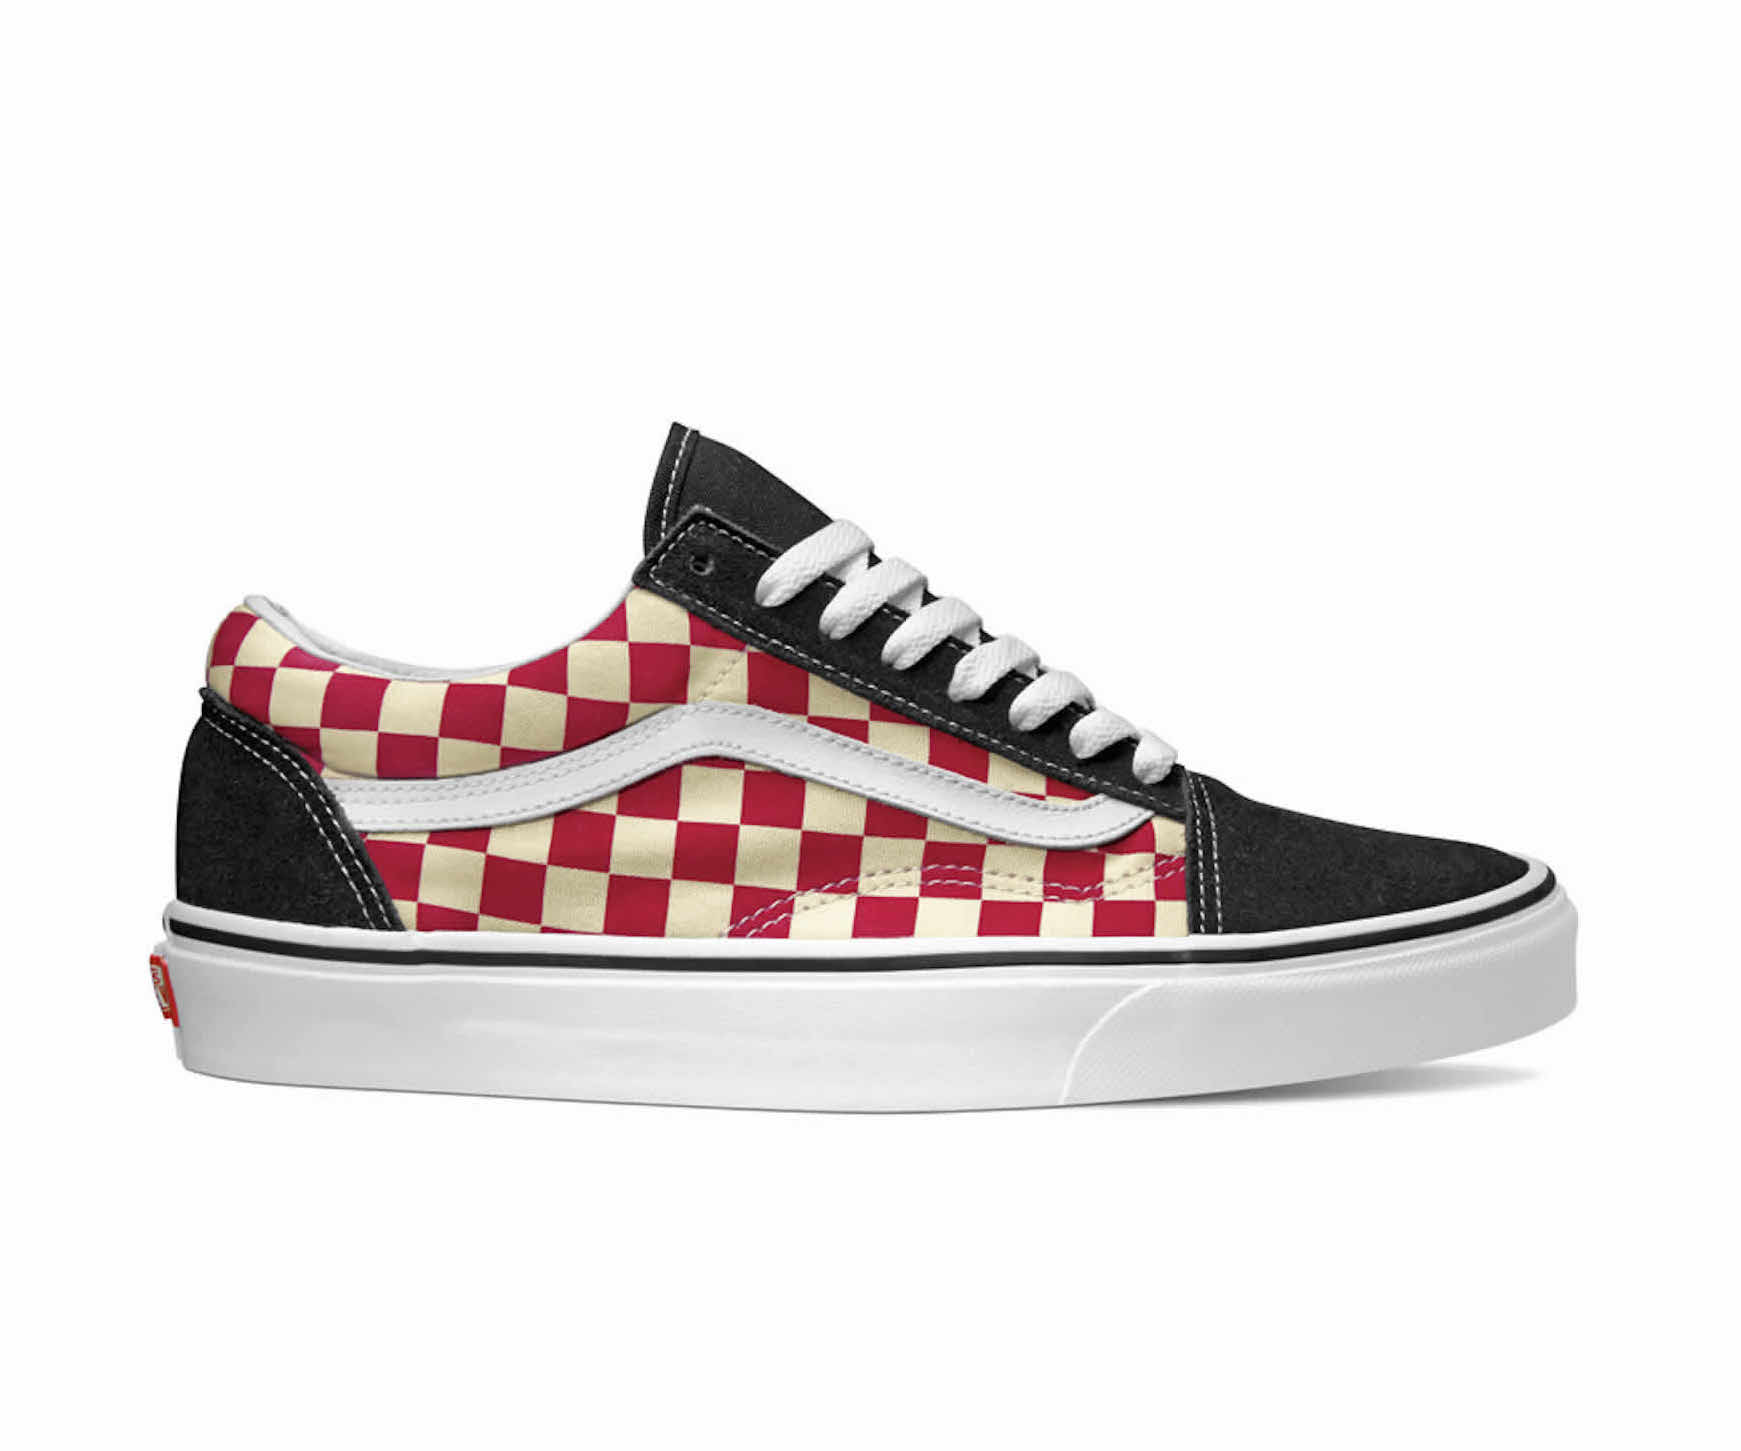 black and red checkerboard